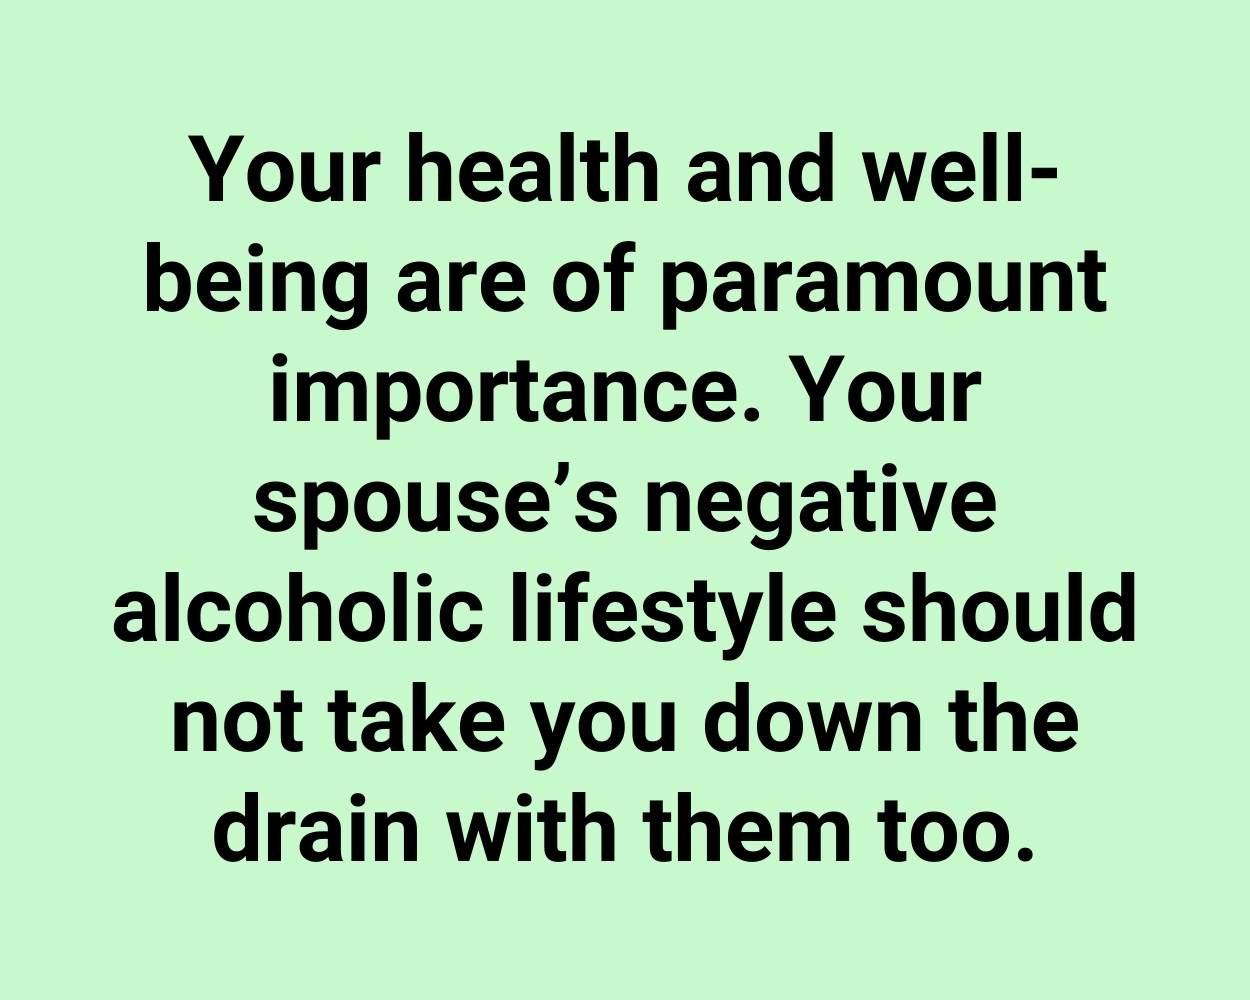 Your health and well-being are of paramount importance